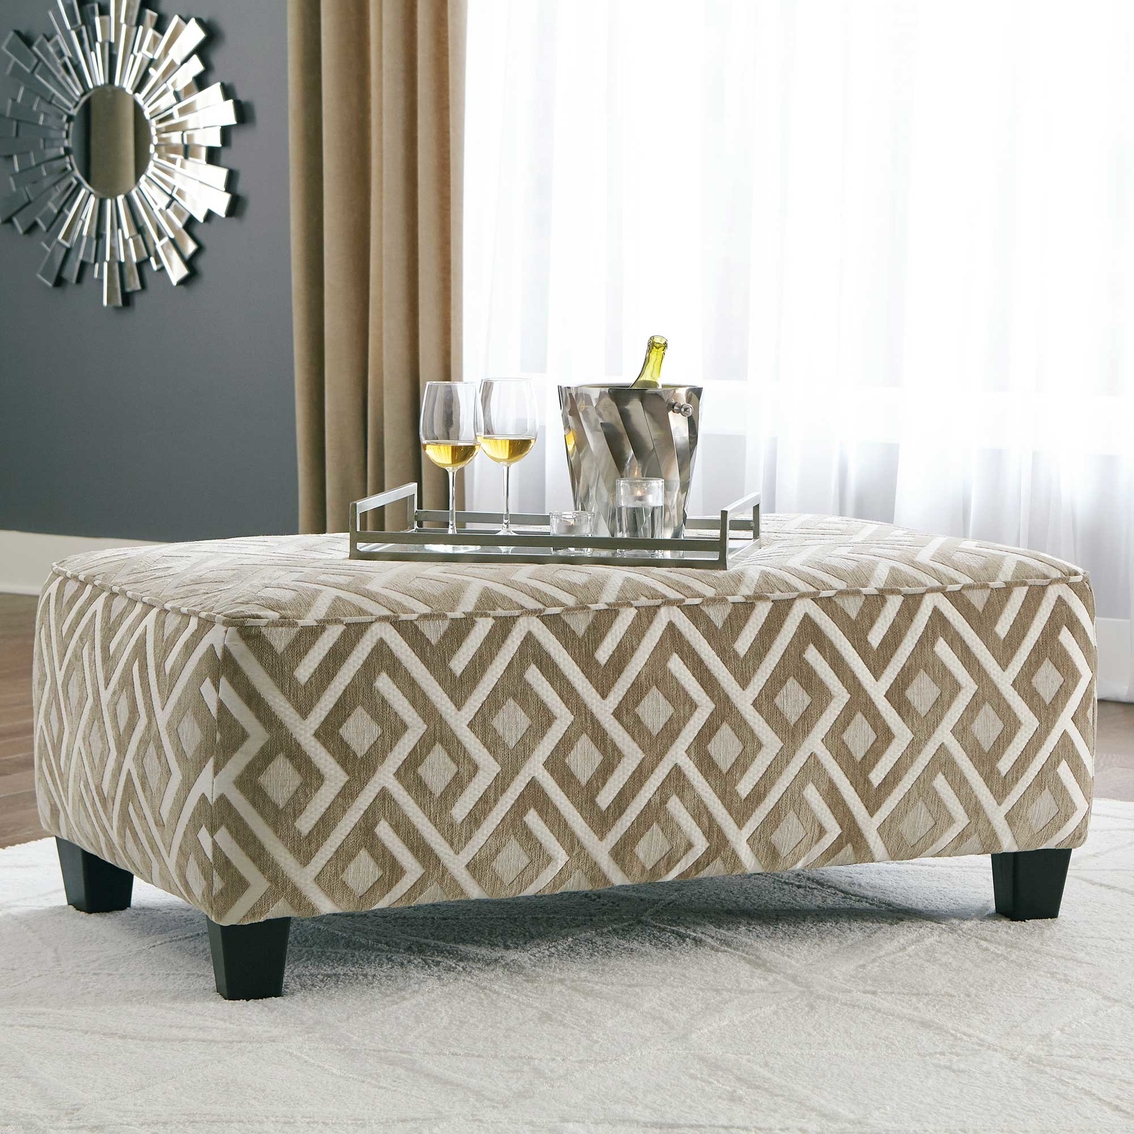 Signature Design by Ashley Dovemont Oversized Accent Ottoman - Image 4 of 4